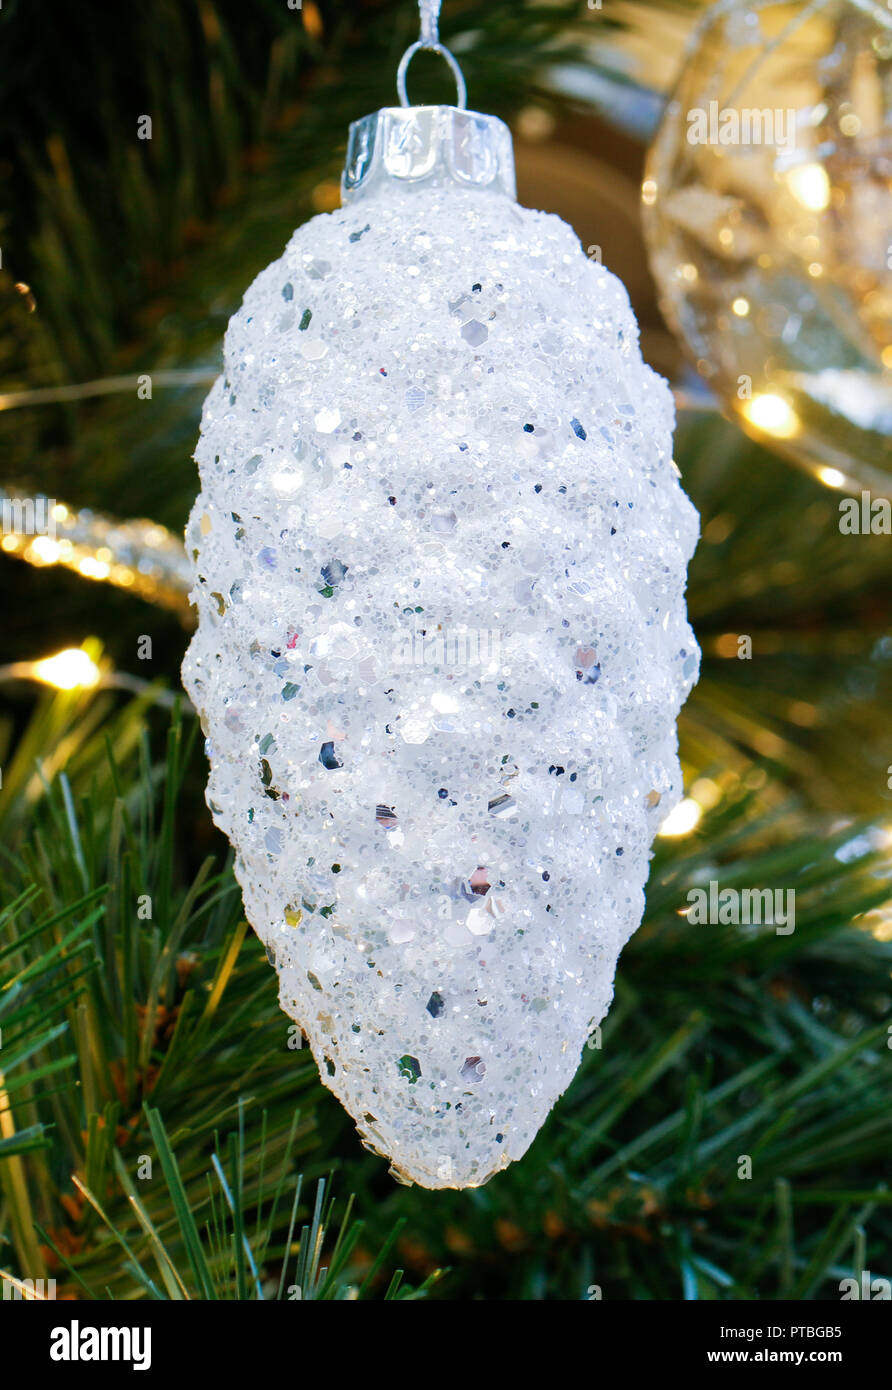 Close up of white Christmas decoration bauble hanging on tree Stock Photo